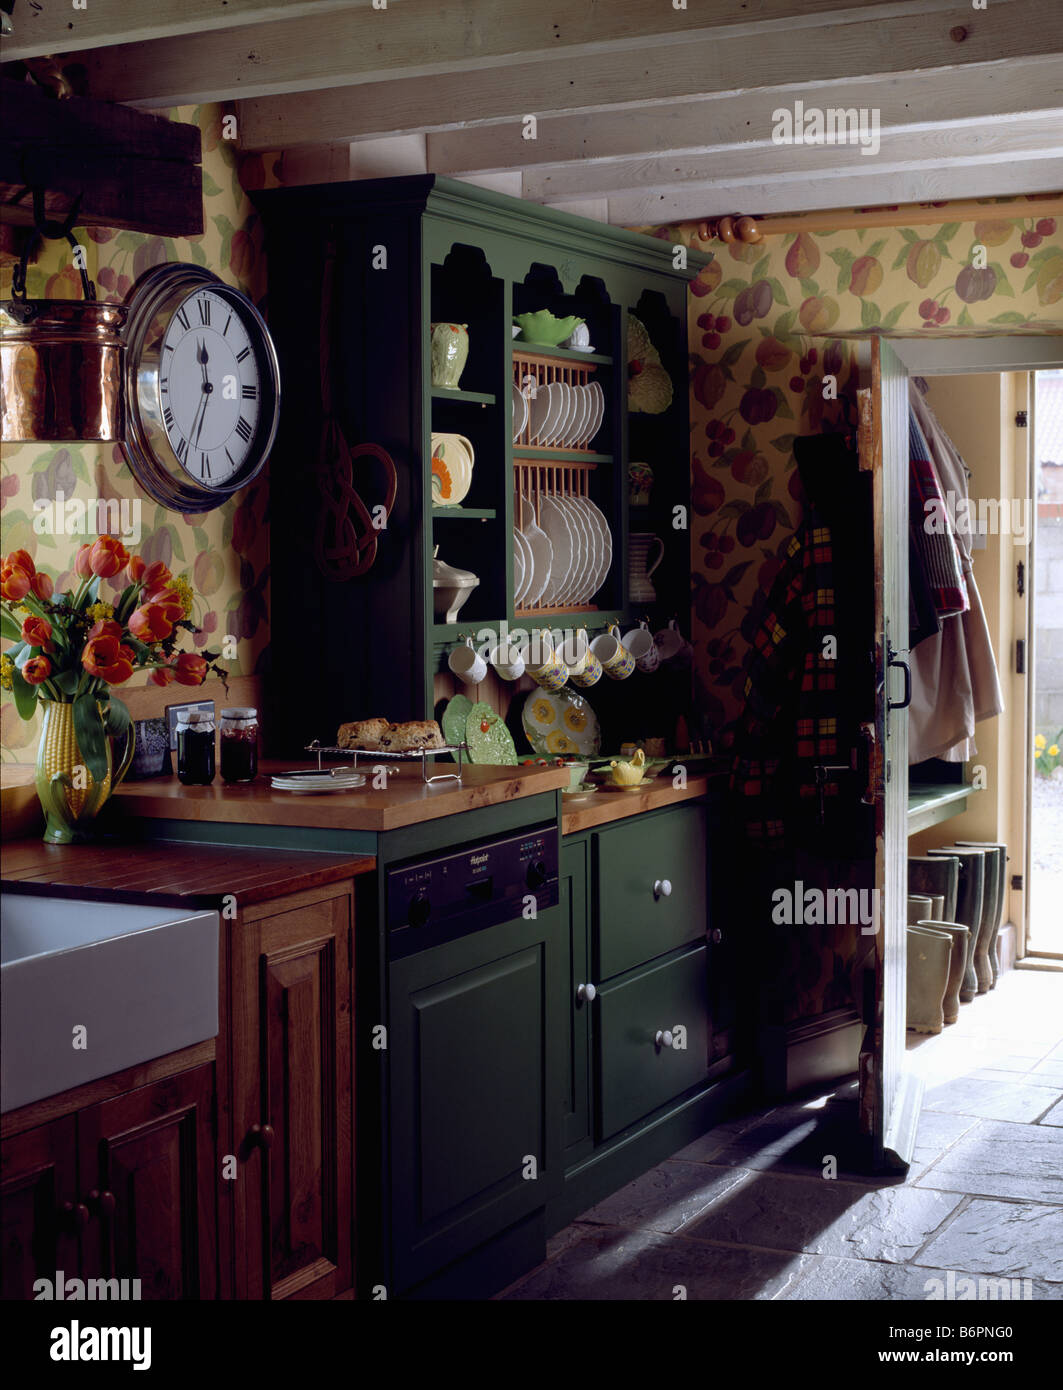 Clock On Wall Beside Small Green Dresser In Cottage Kitchen With